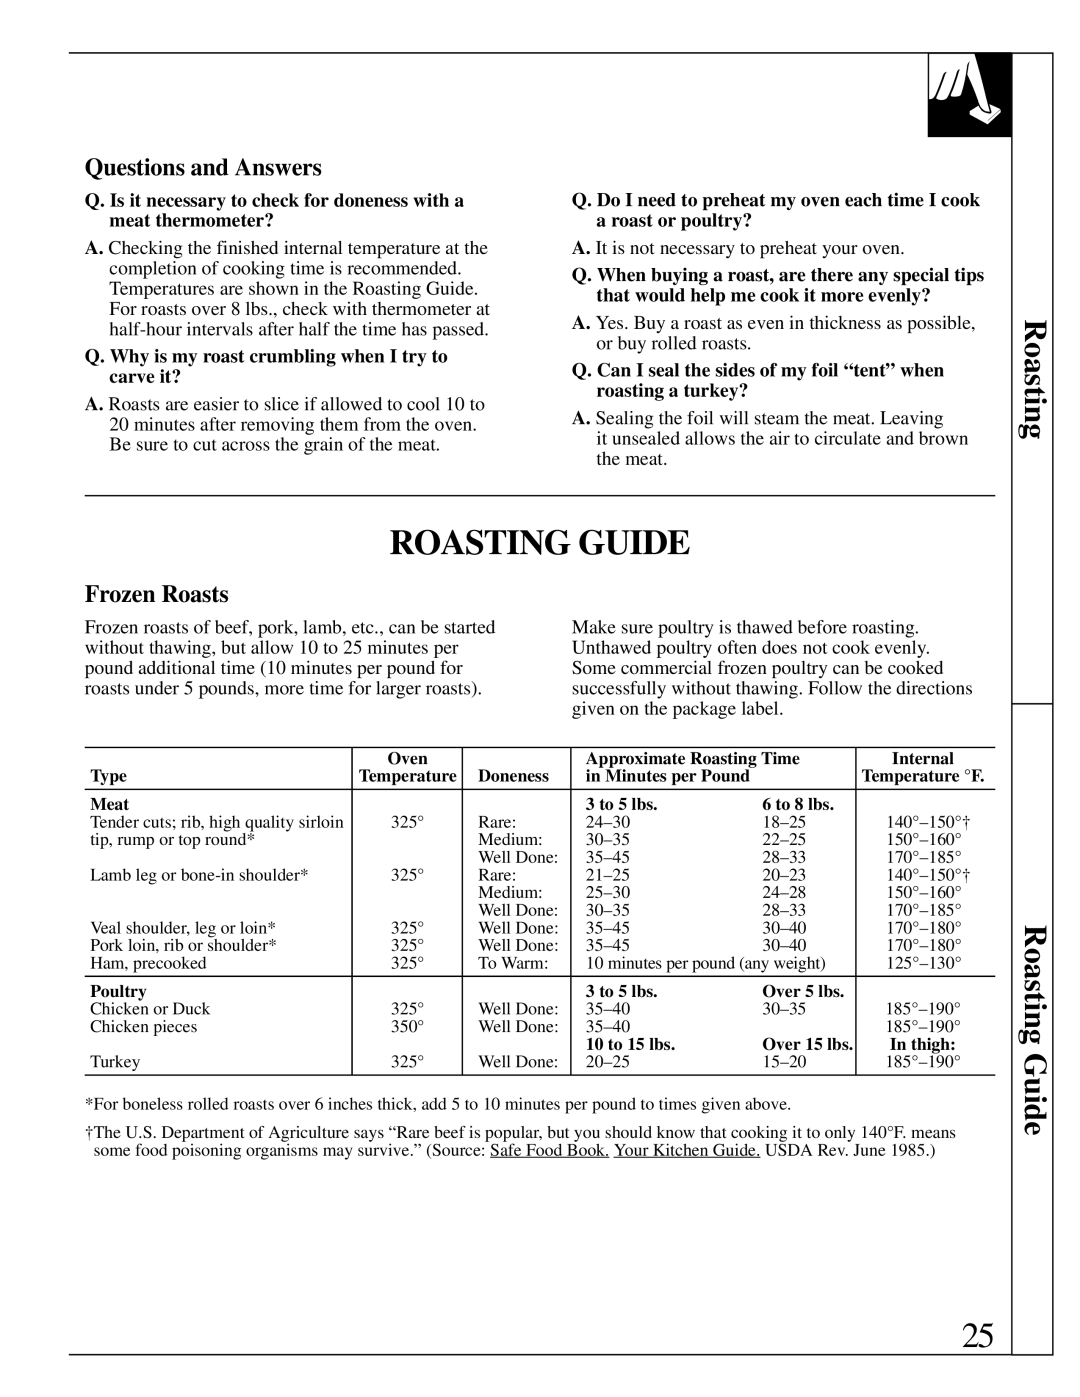 GE 164D2966P238, 49-8726 warranty Roasting Guide, Frozen Roasts, Why is my roast crumbling when I try to carve it? 